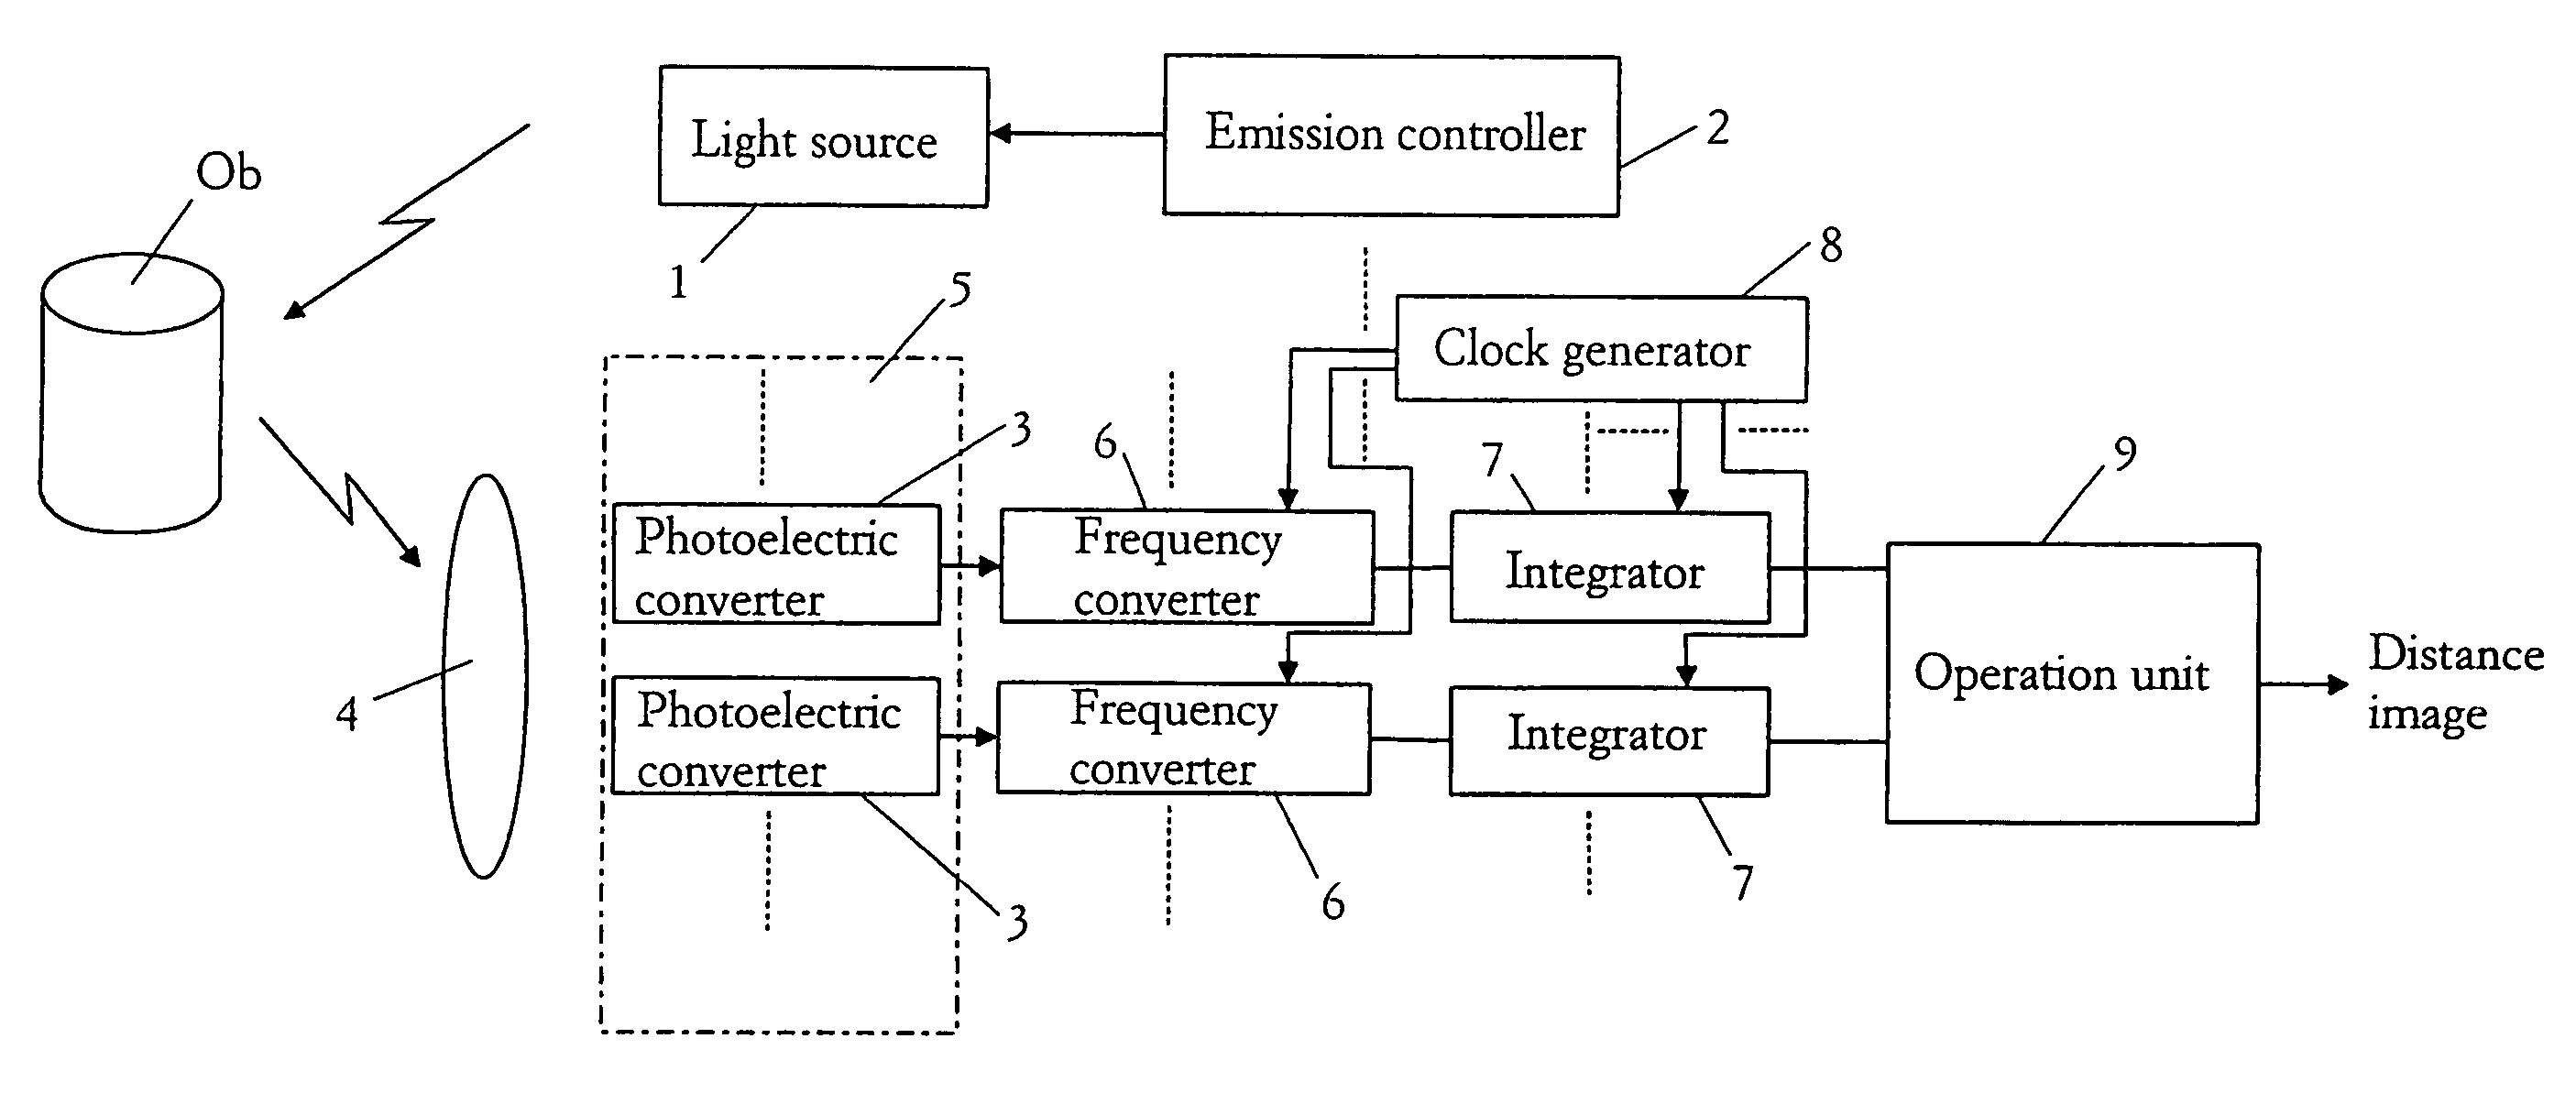 Spatial information detecting device using intensity-modulated light and a beat signal